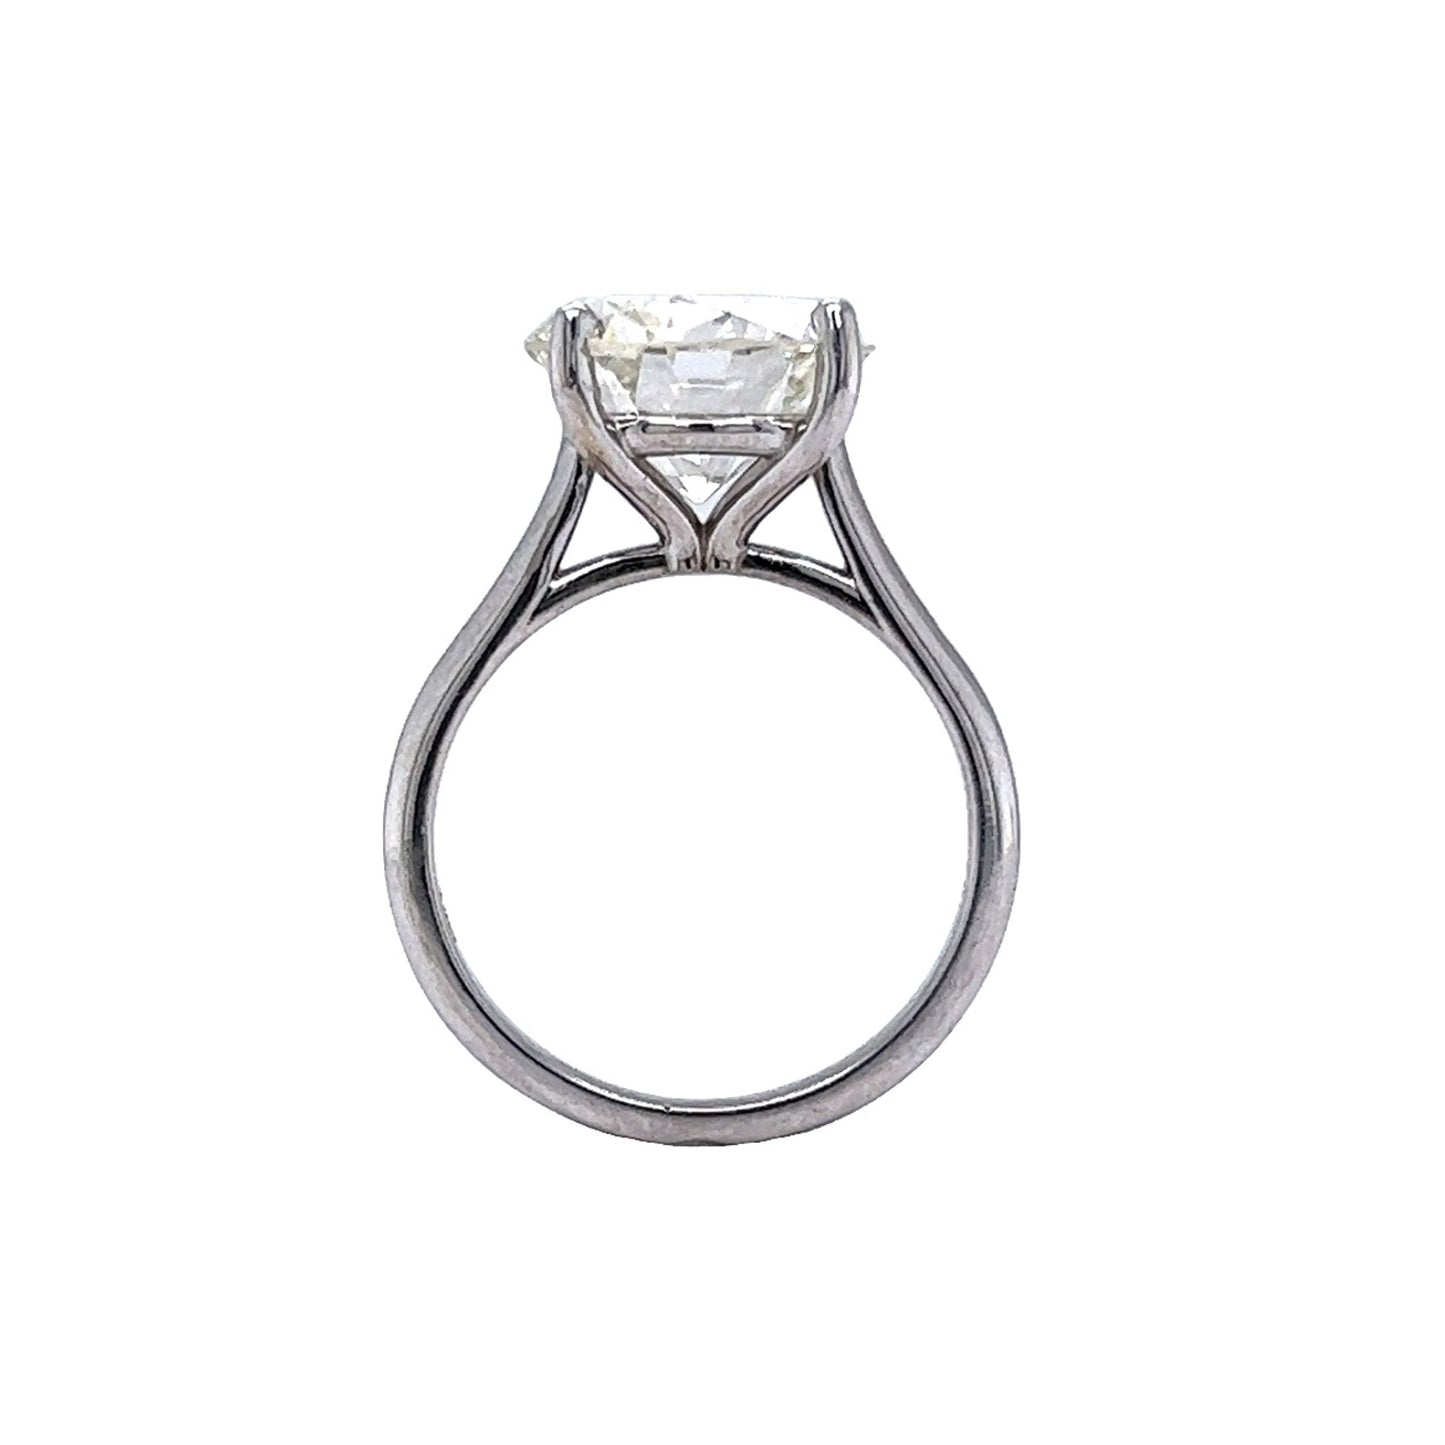 5.04 Round Brilliant Diamond Solitaire Engagement Ring in 14k White Gold